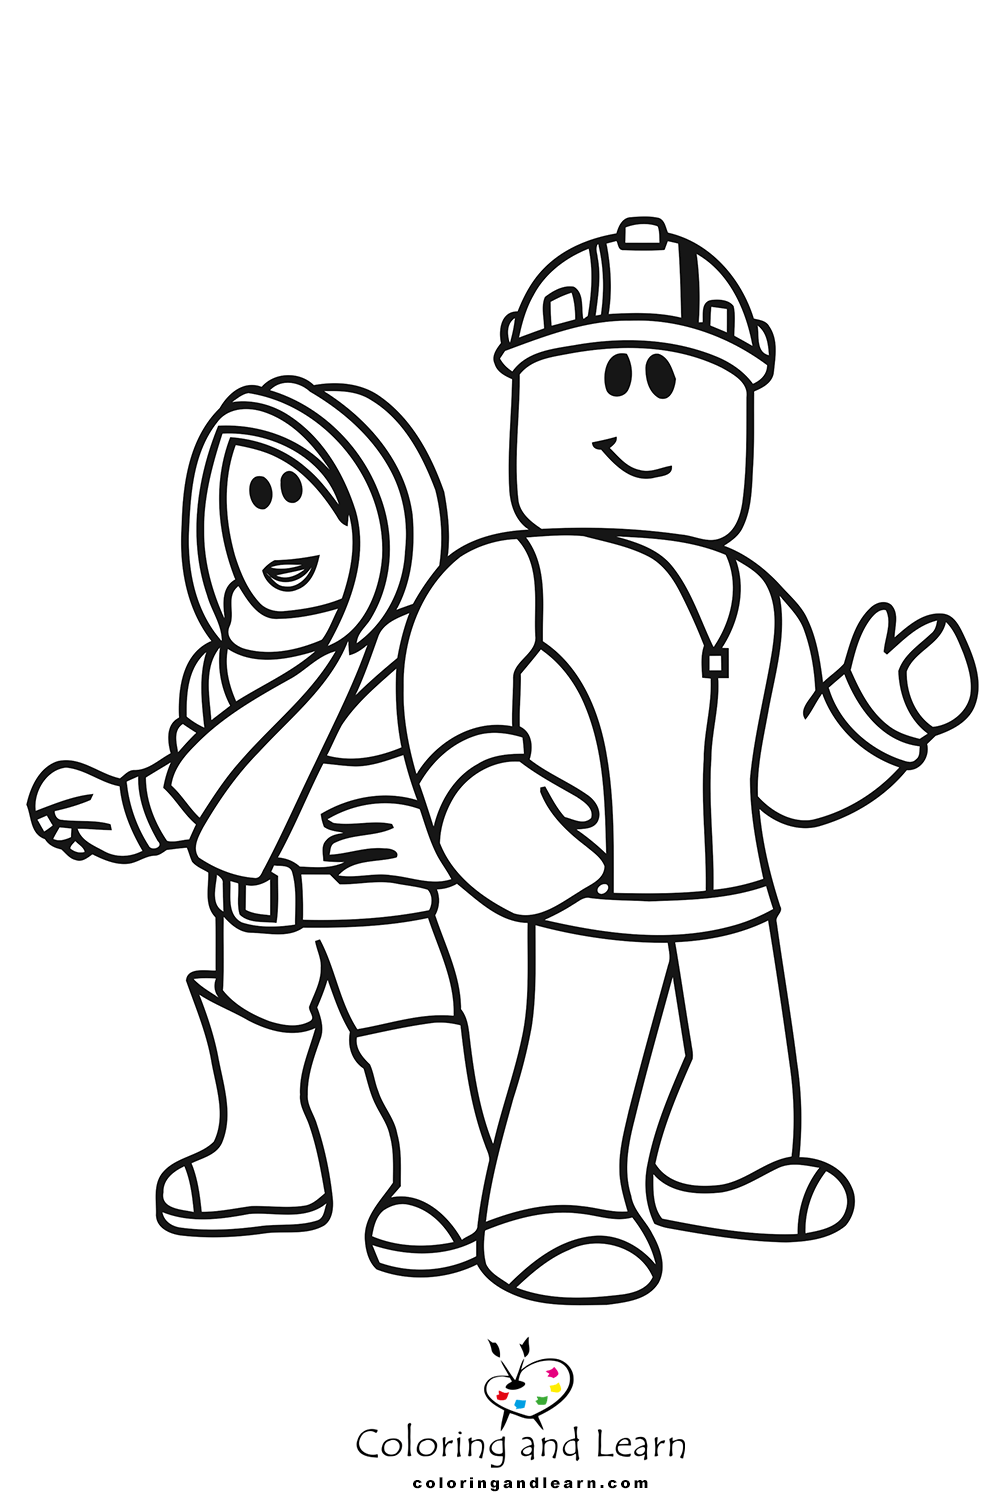 Roblox coloring pages rcoloringpages